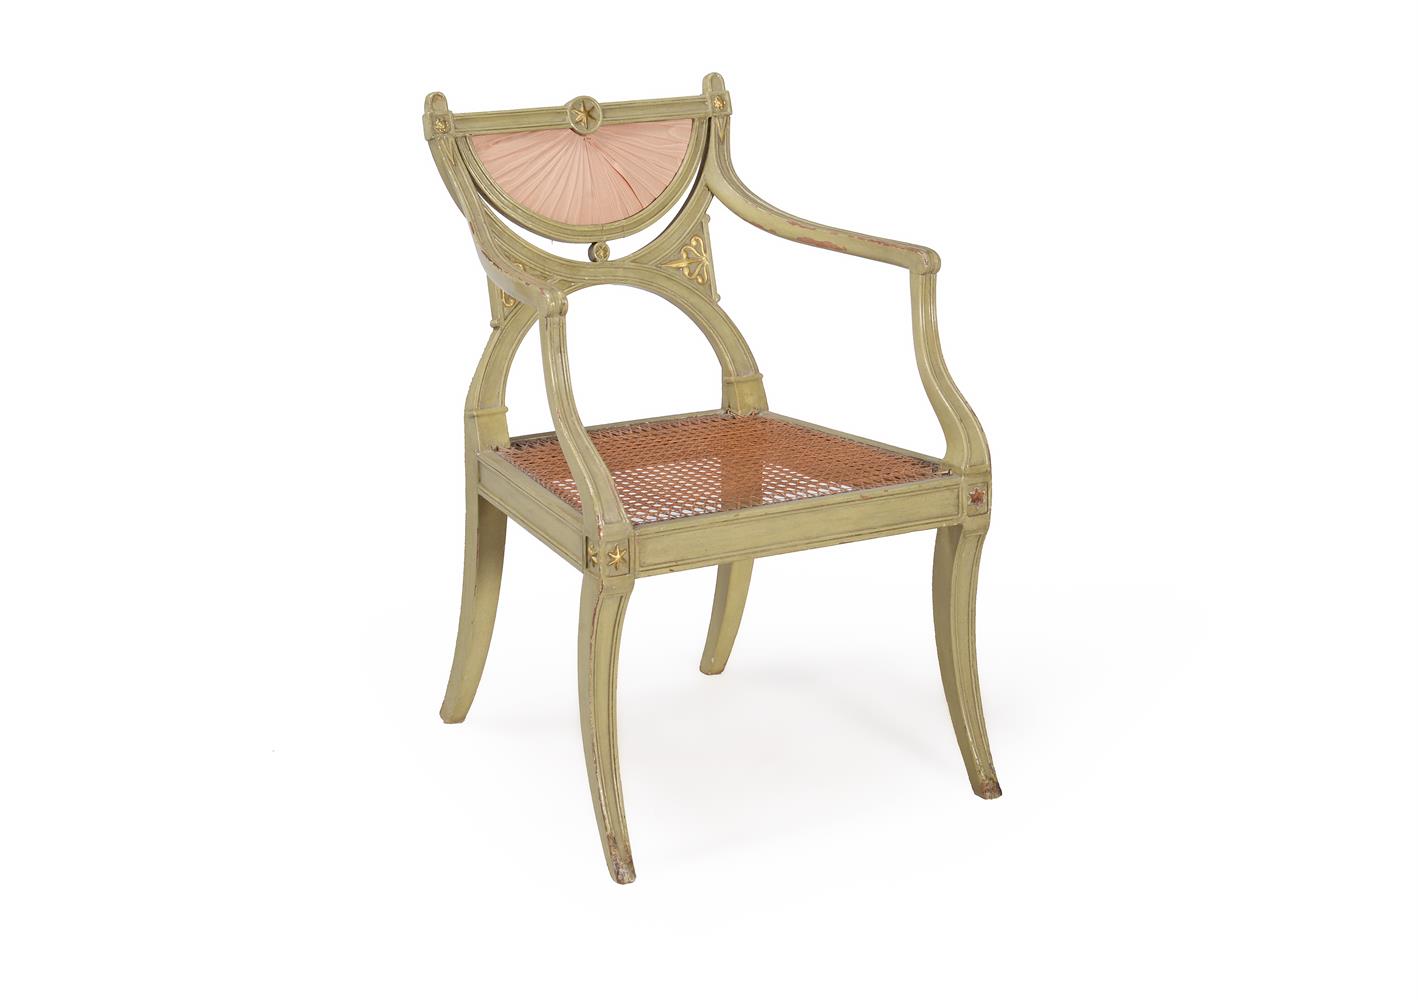 A PAINTED AND PARCEL GILT OPEN ARMCHAIR, AFTER A DESIGN BY GEORGE SMITH, CIRCA 1815